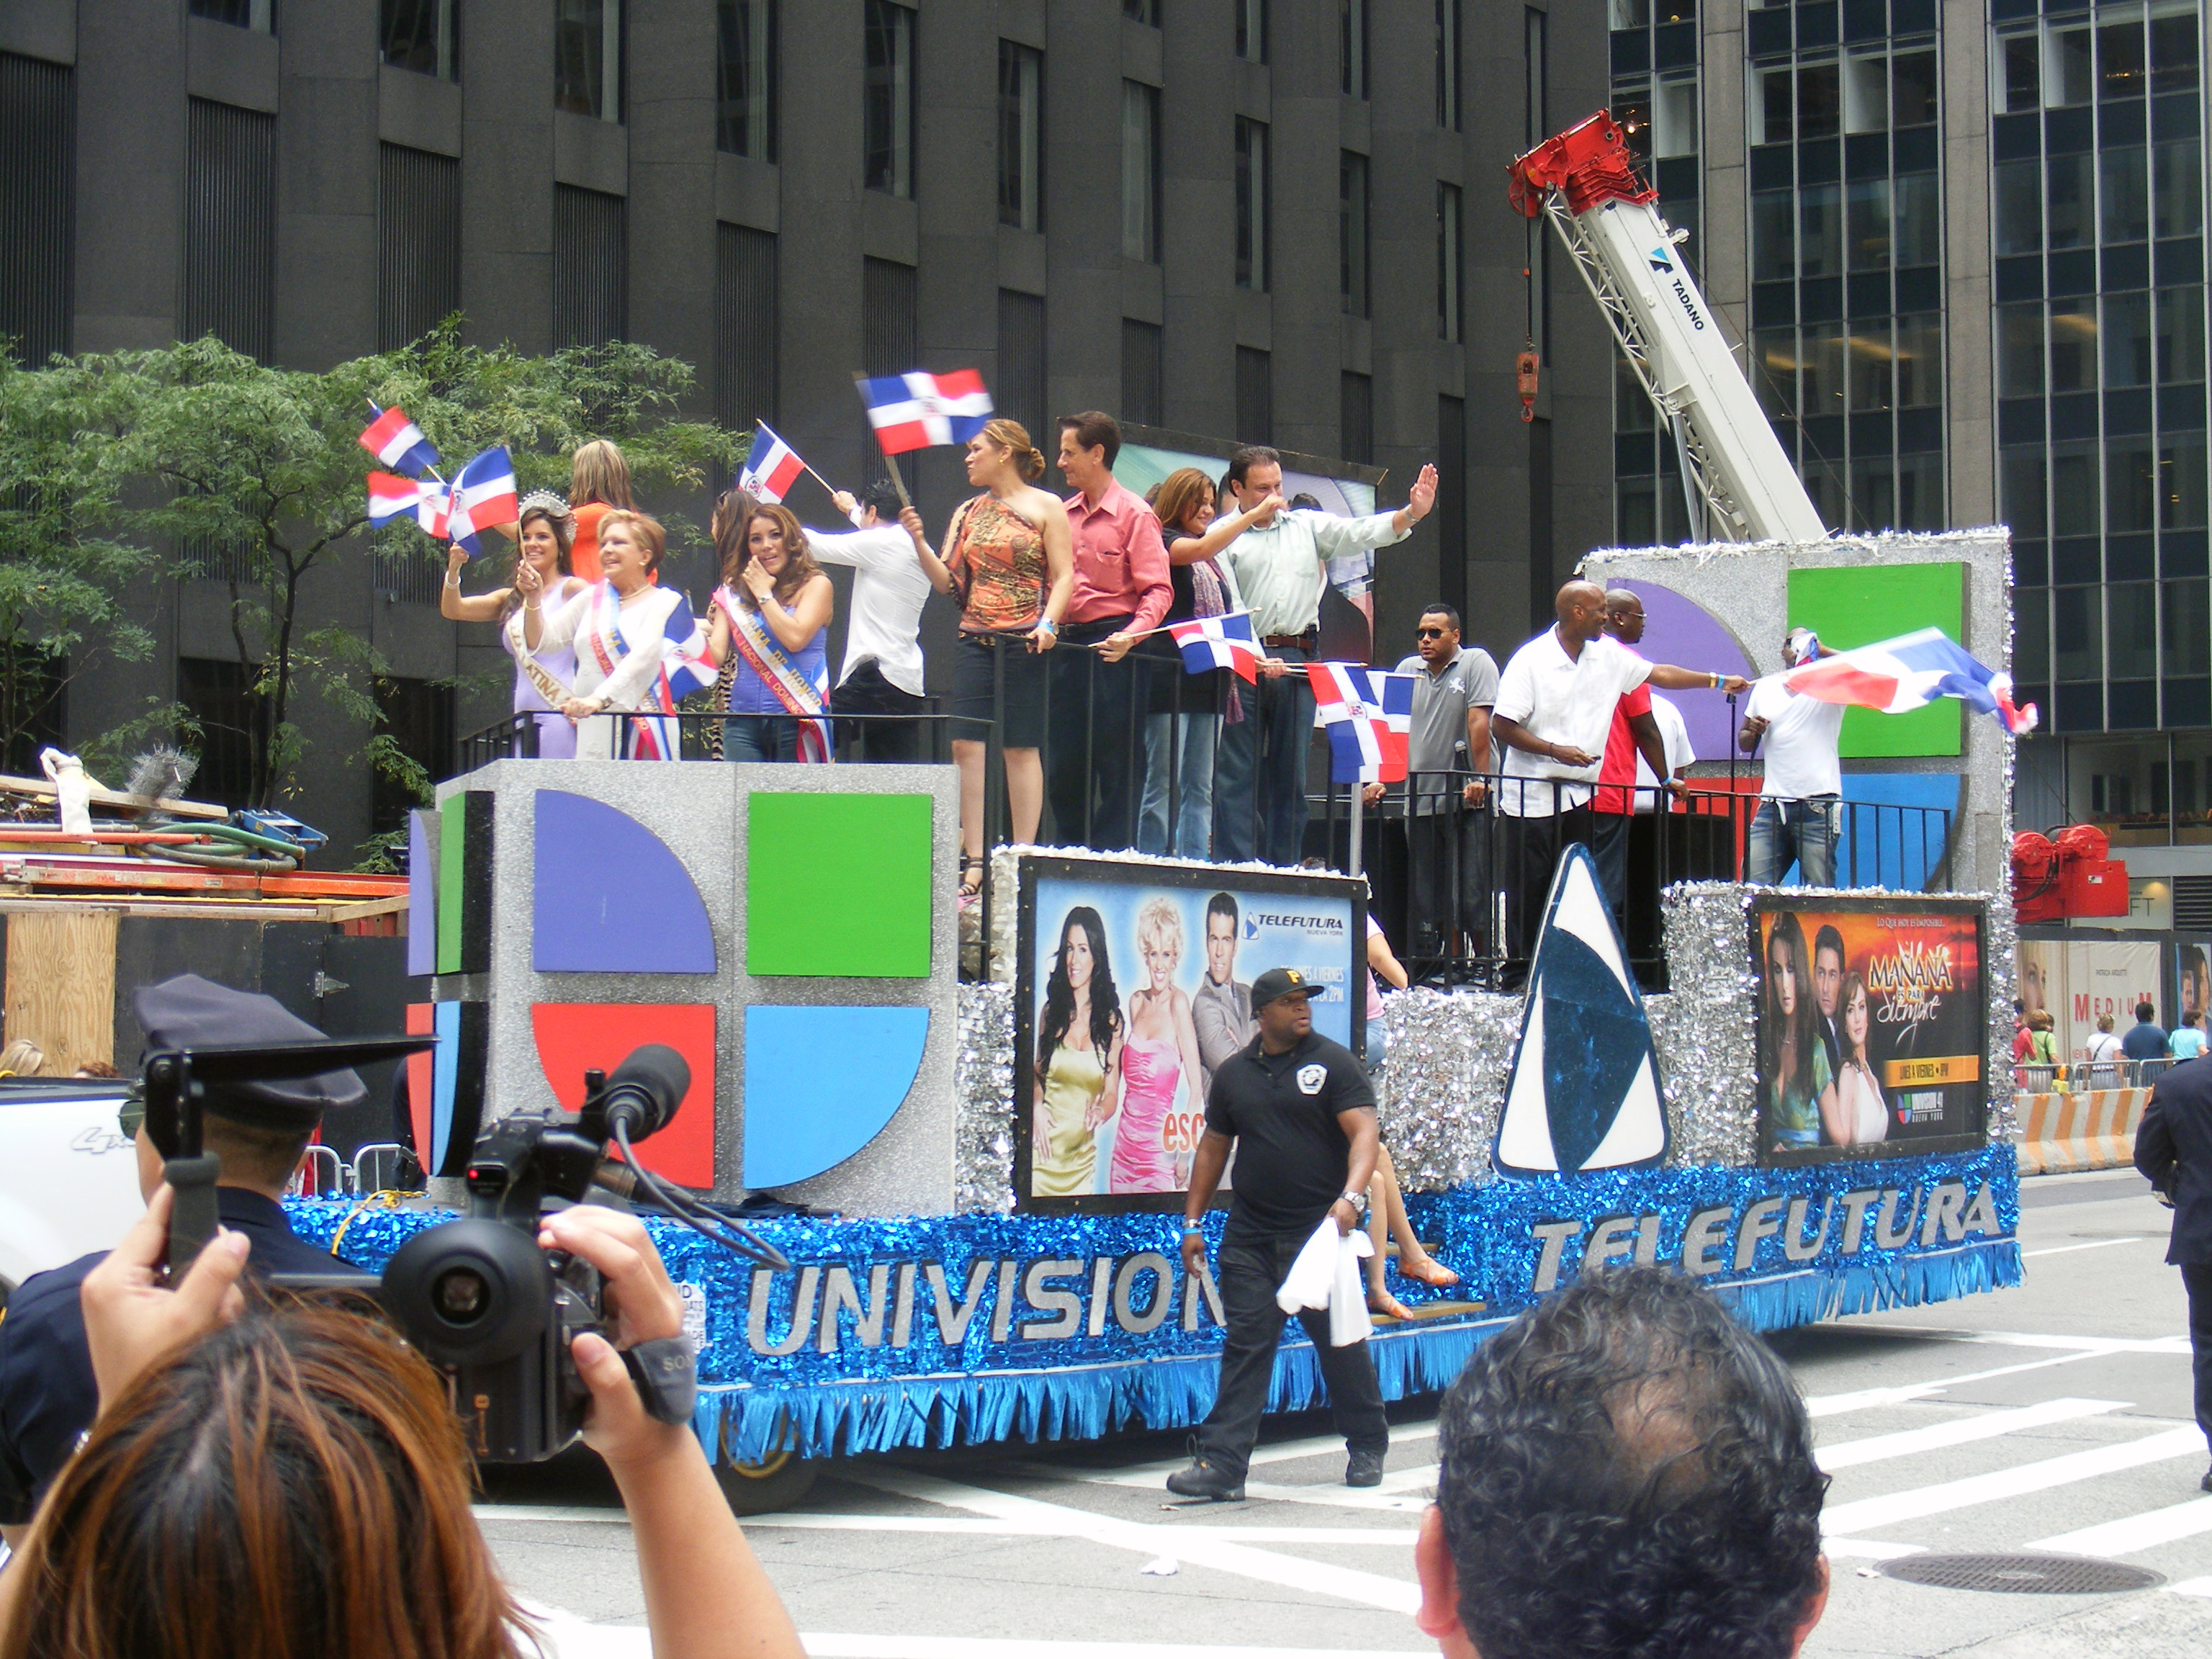 A group of adult people stand on a large float decorated with the Univision logo waving Dominican flags